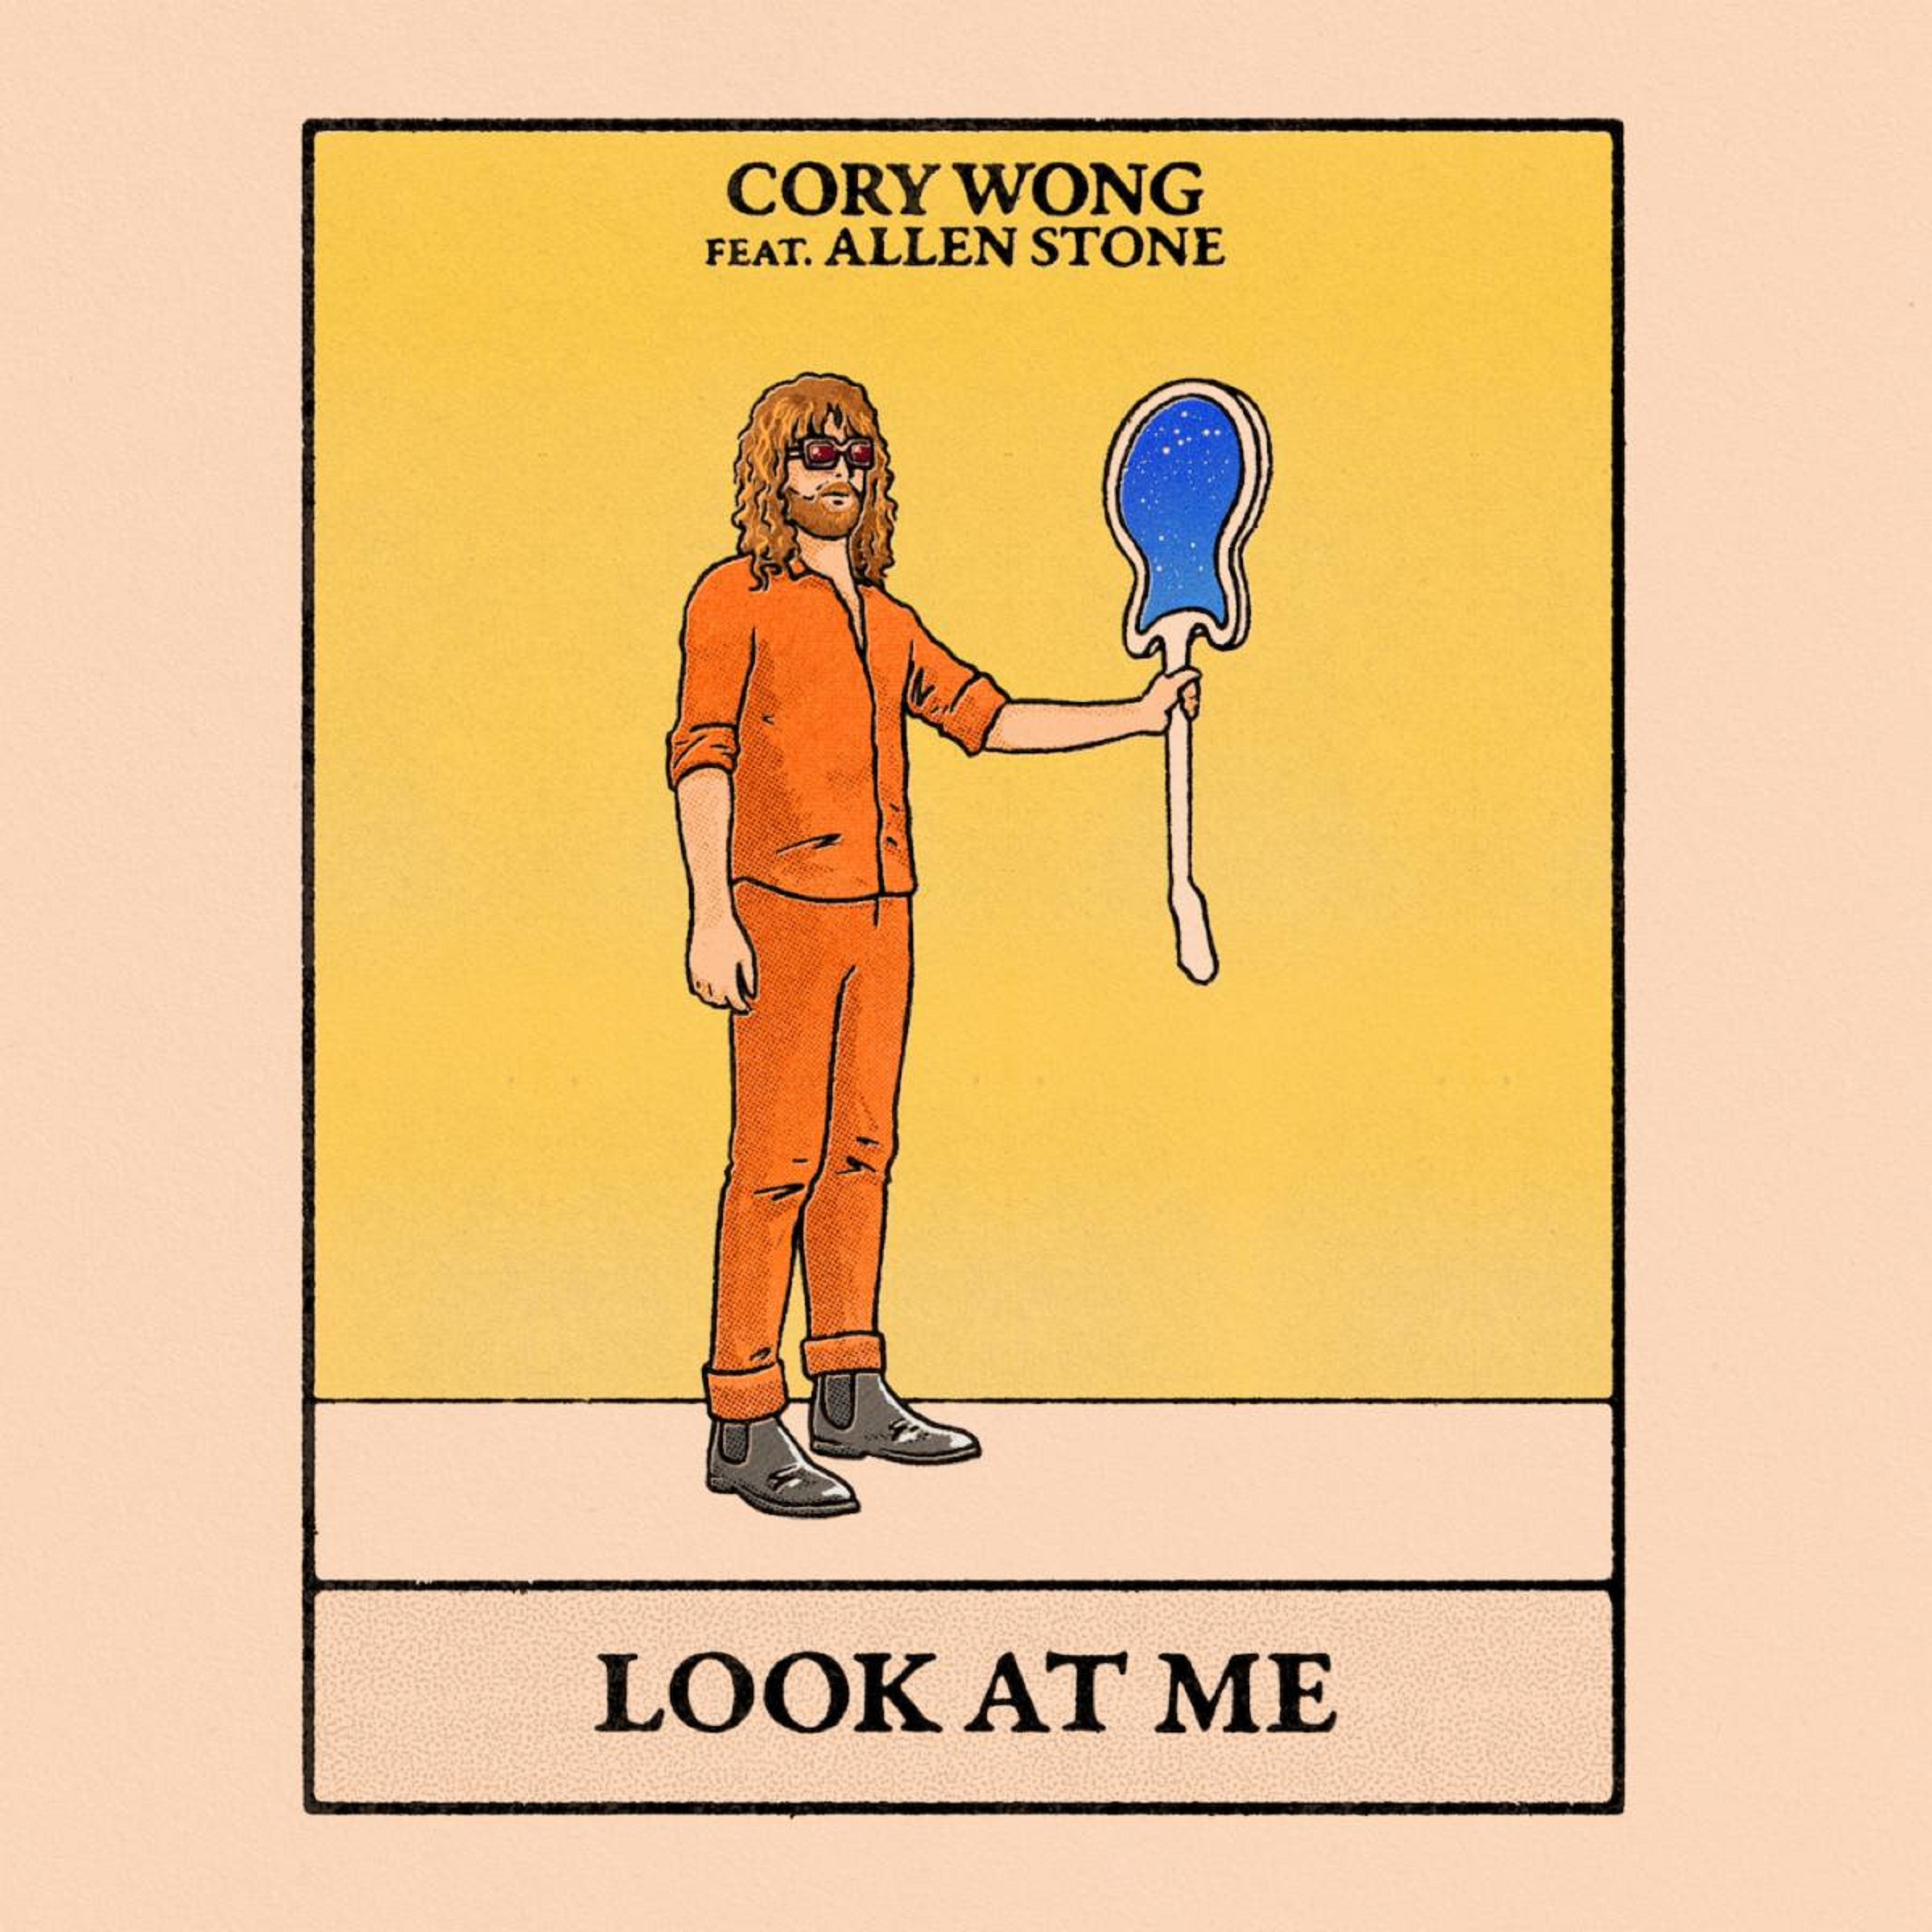 Cory Wong & Allen Stone release new song; new Cory Wong album to come